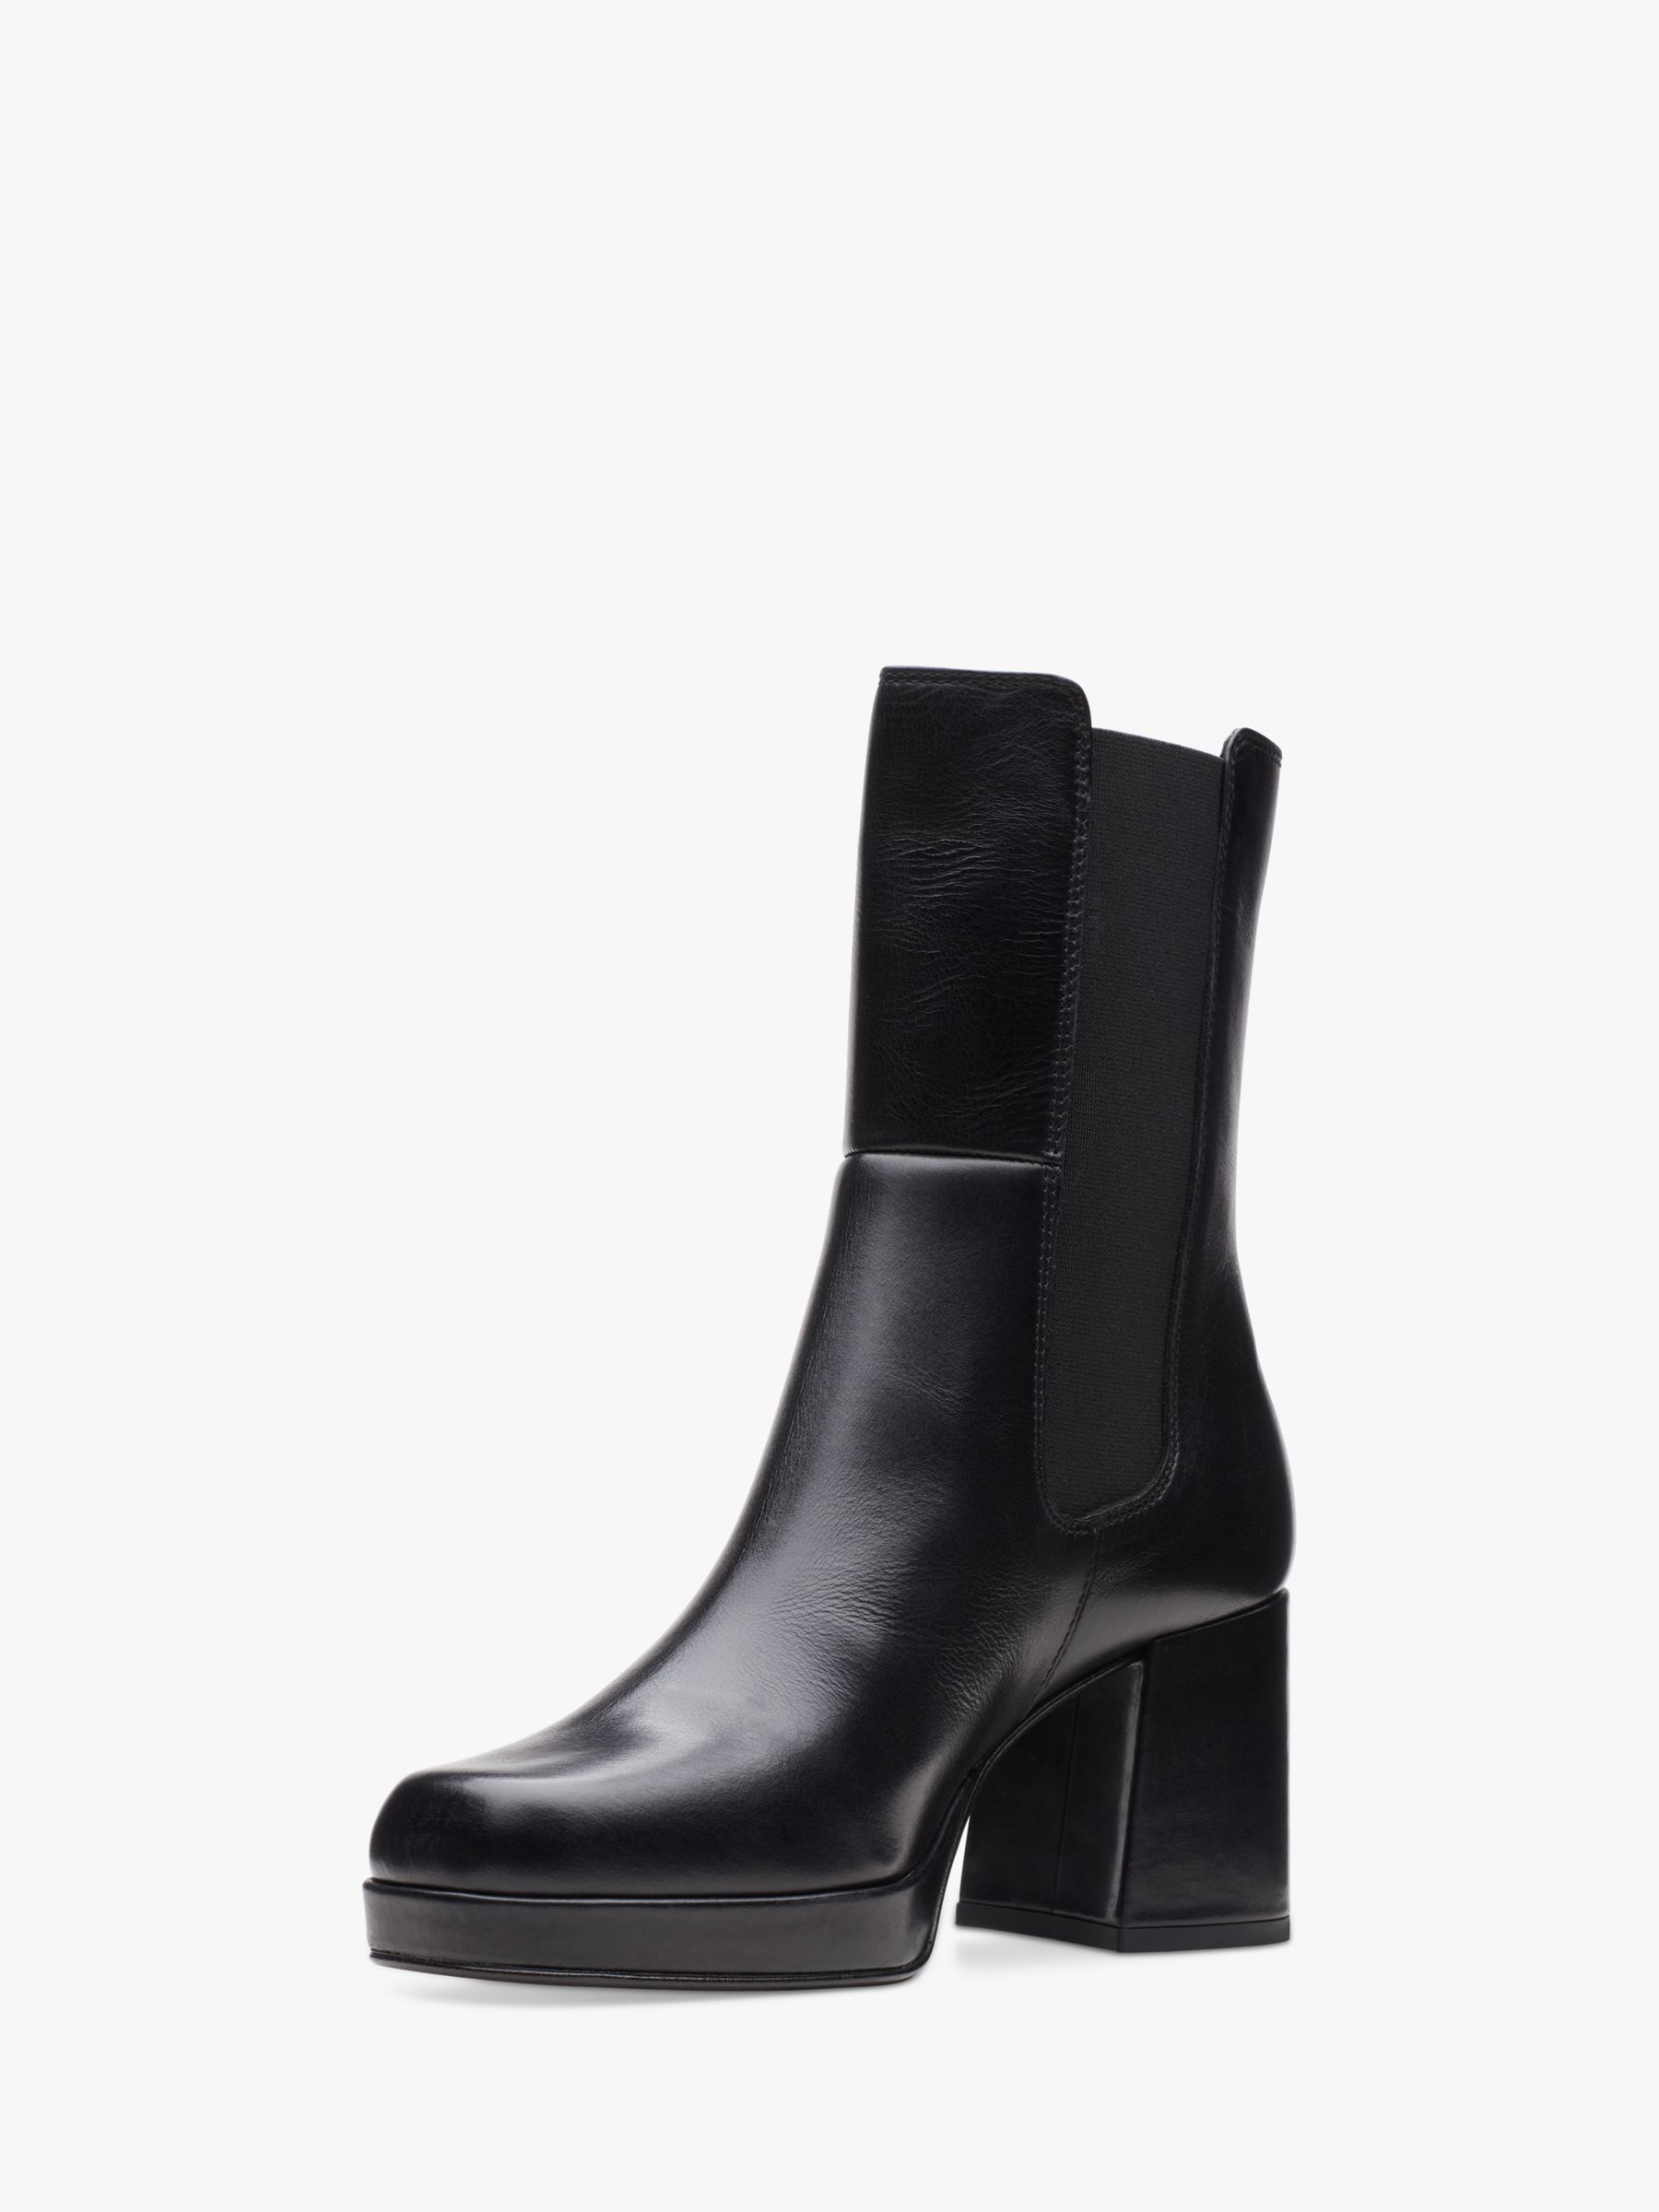 Clarks Pique Up Leather Chelsea Boots, Black at John Lewis & Partners